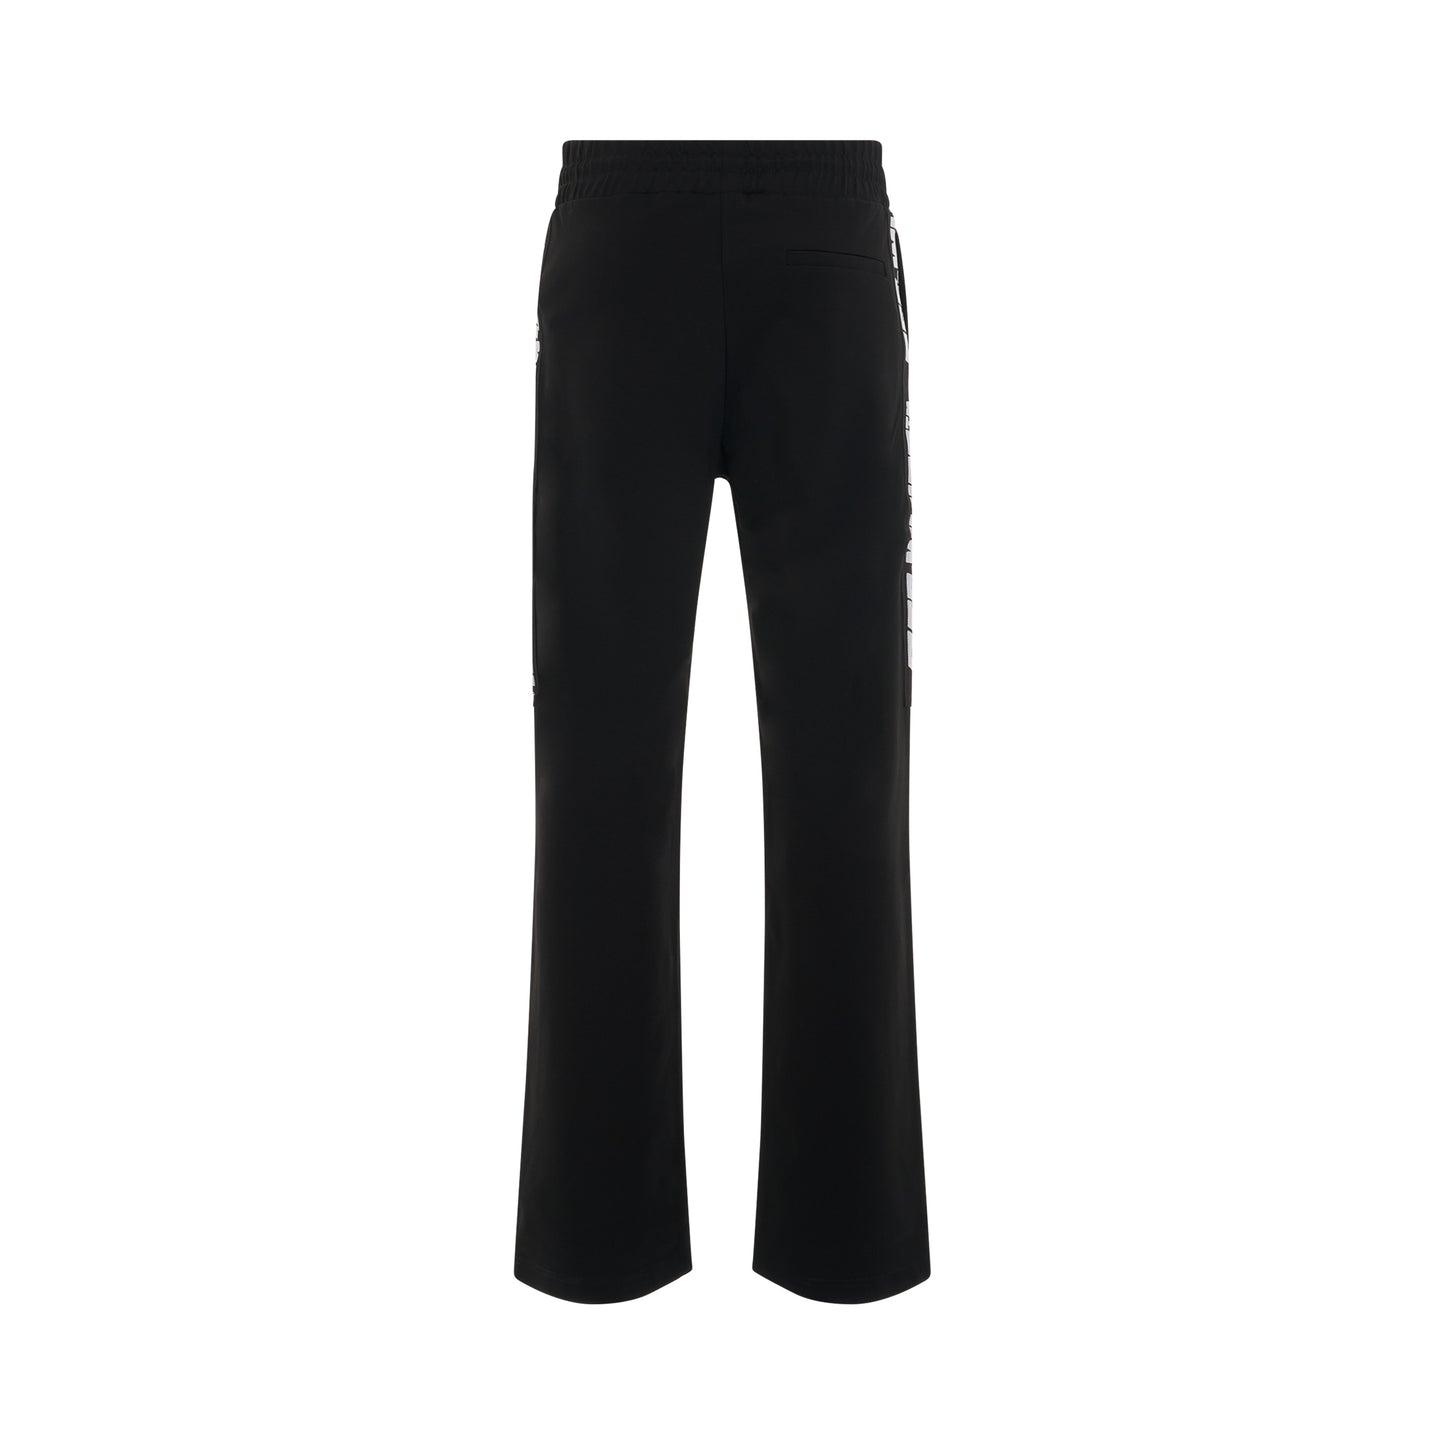 Athleisure Logo Band Track Pants in Black